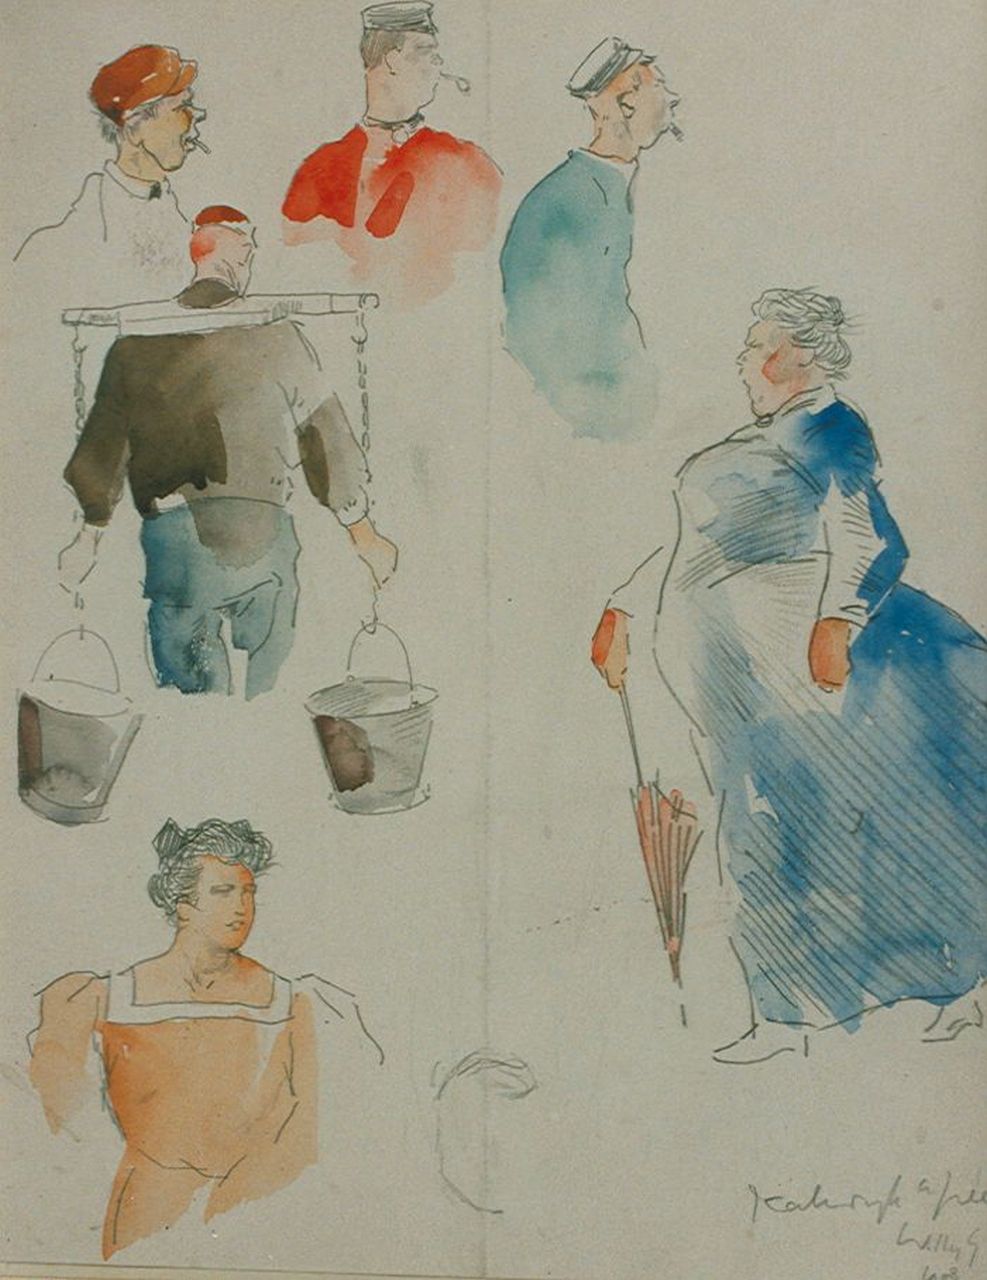 Sluiter J.W.  | Jan Willem 'Willy' Sluiter, Sketches with natives from Katwijk, mixed media on paper 29.0 x 22.5 cm, signed l.r. and dated 1908